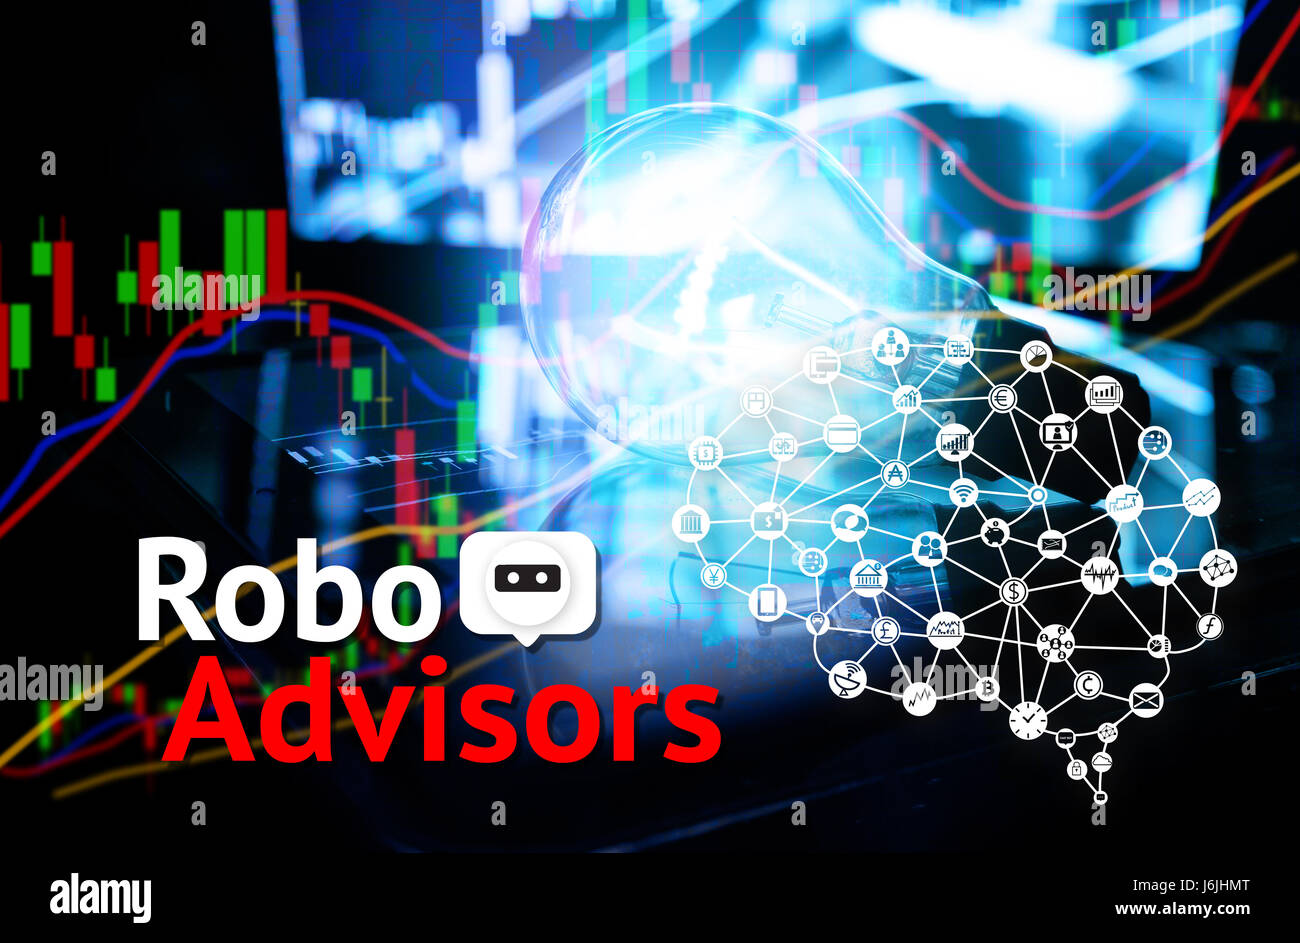 Cyber communication and robotic concepts. robo advisor concept. Text and brain icons with abstract light bulb and blur stock market chart background Stock Photo